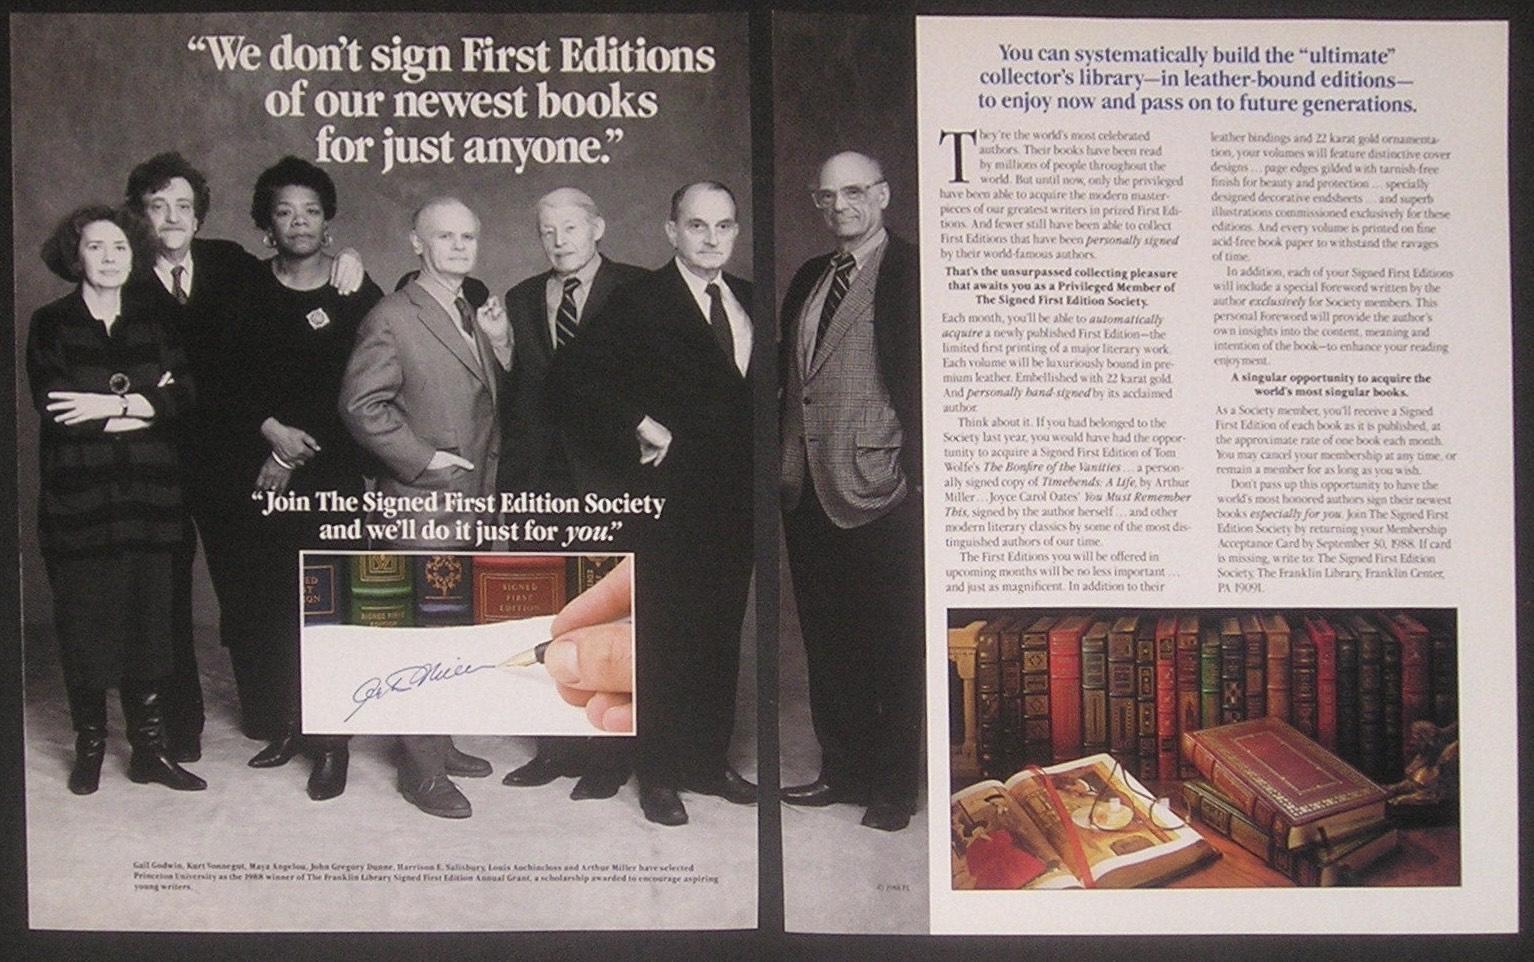 Photo of a magazine page with an ad for the Signed First Edition Society. The quote above a group shot of people says "we don't sign First Editions of our newest books for just anyone."